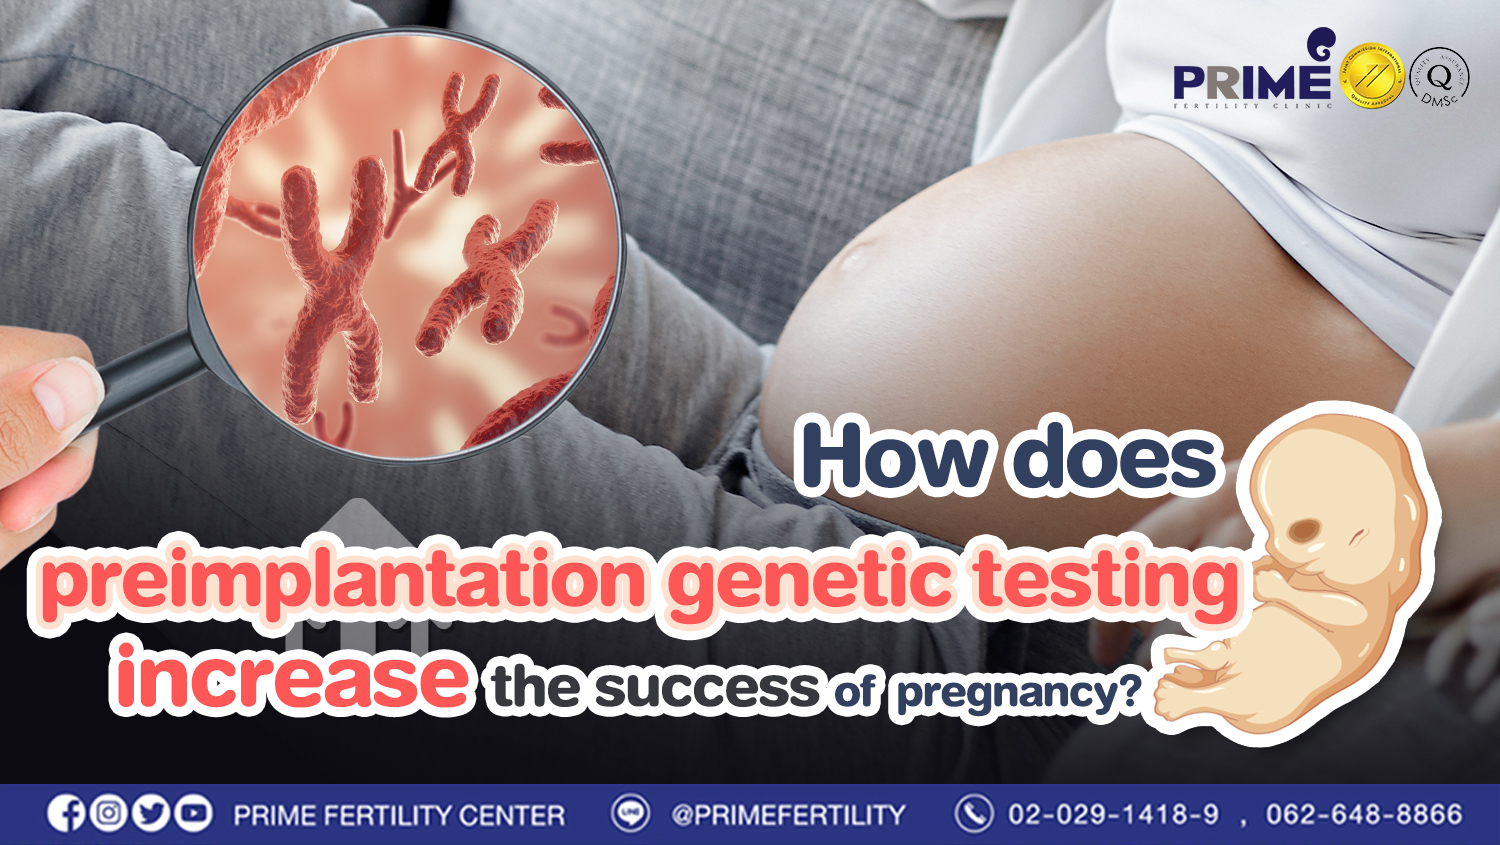 How does preimplantation genetic testing increase the success of pregnancy